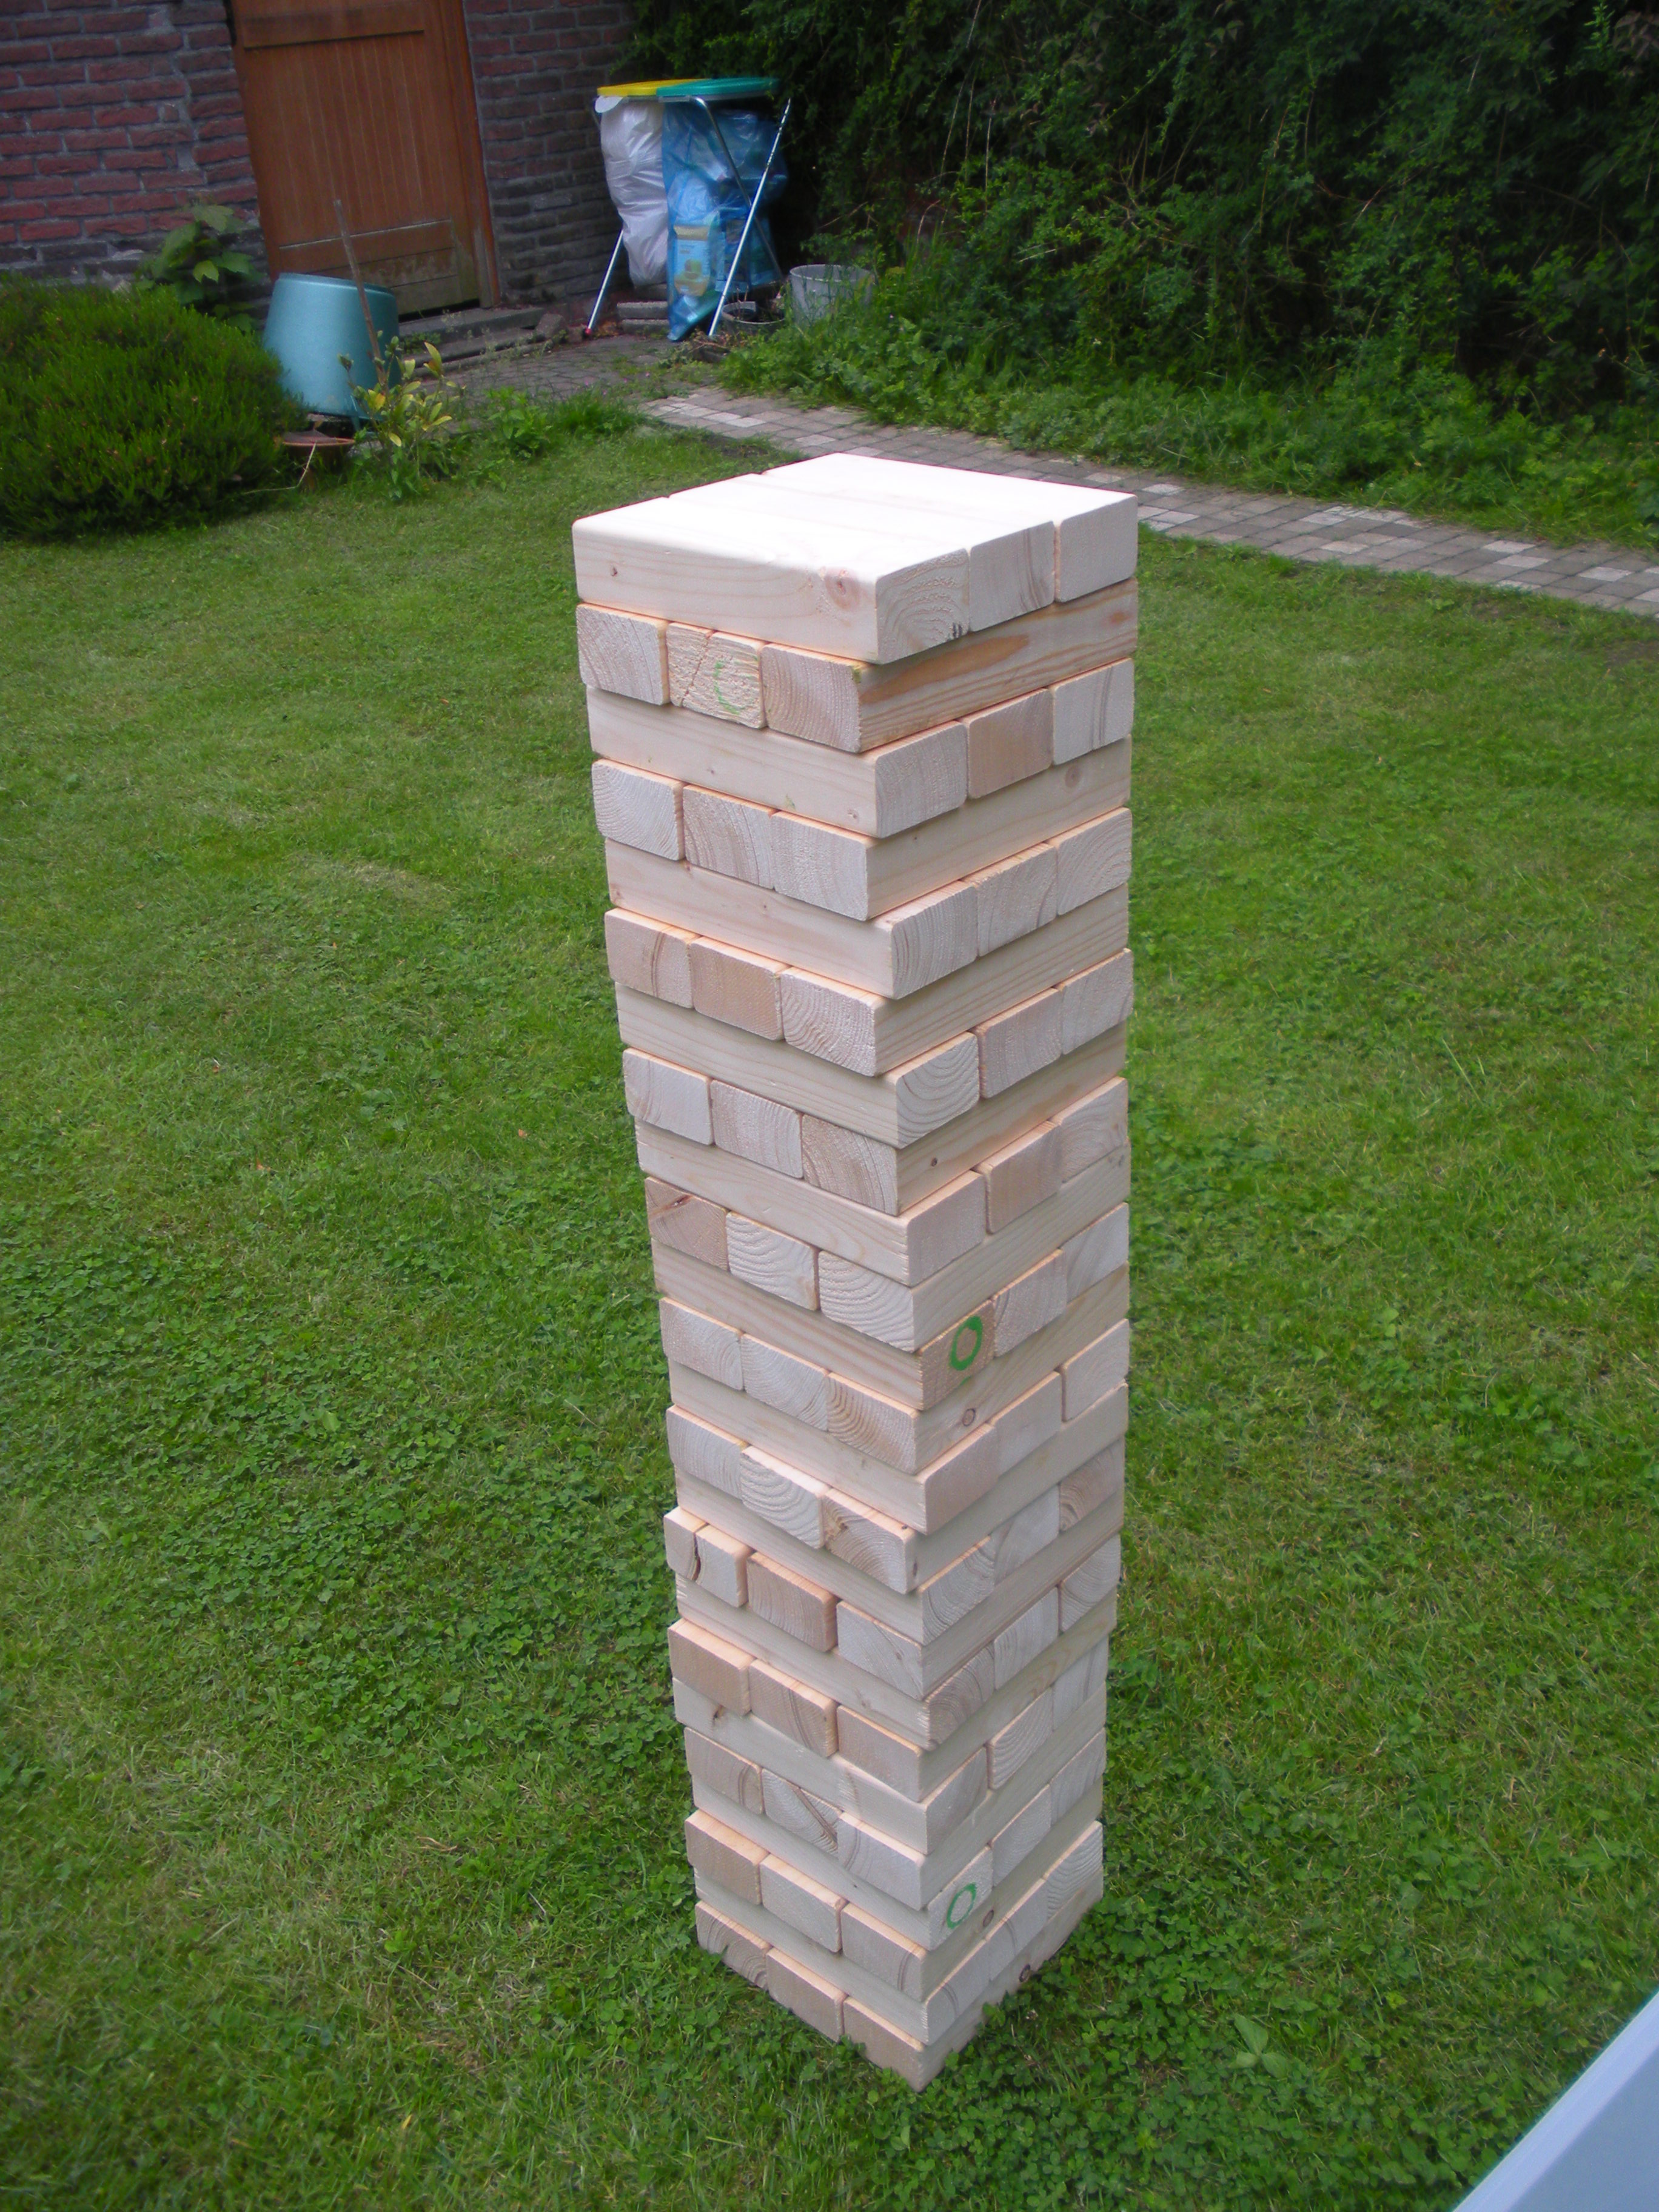 Giant "wooden block stacking game" tower